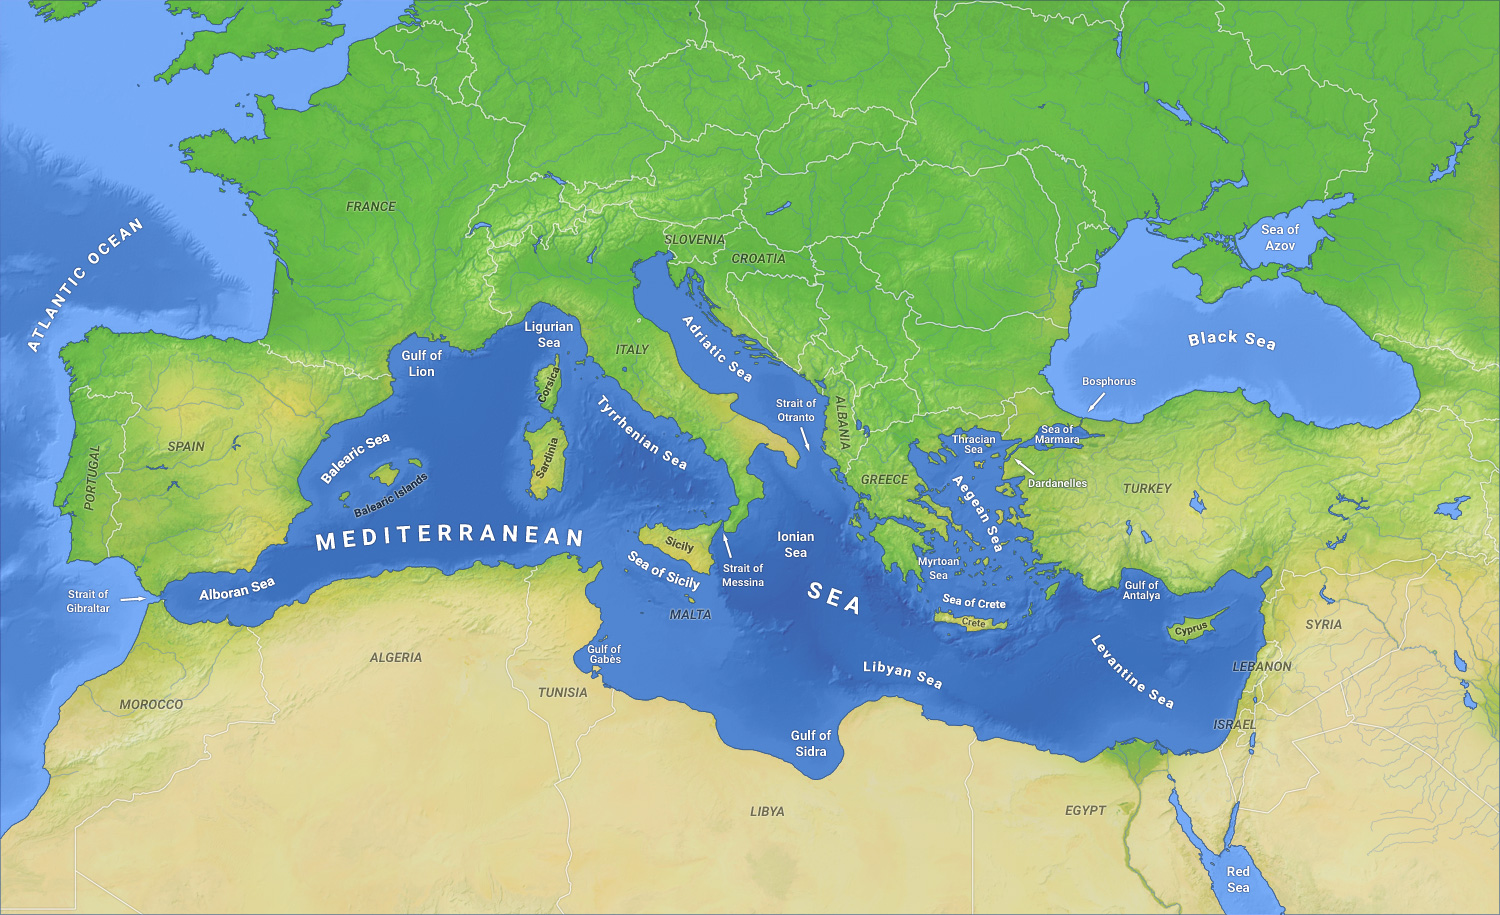 EU Supports The Protection of the Mediterranean Sea’s Environment